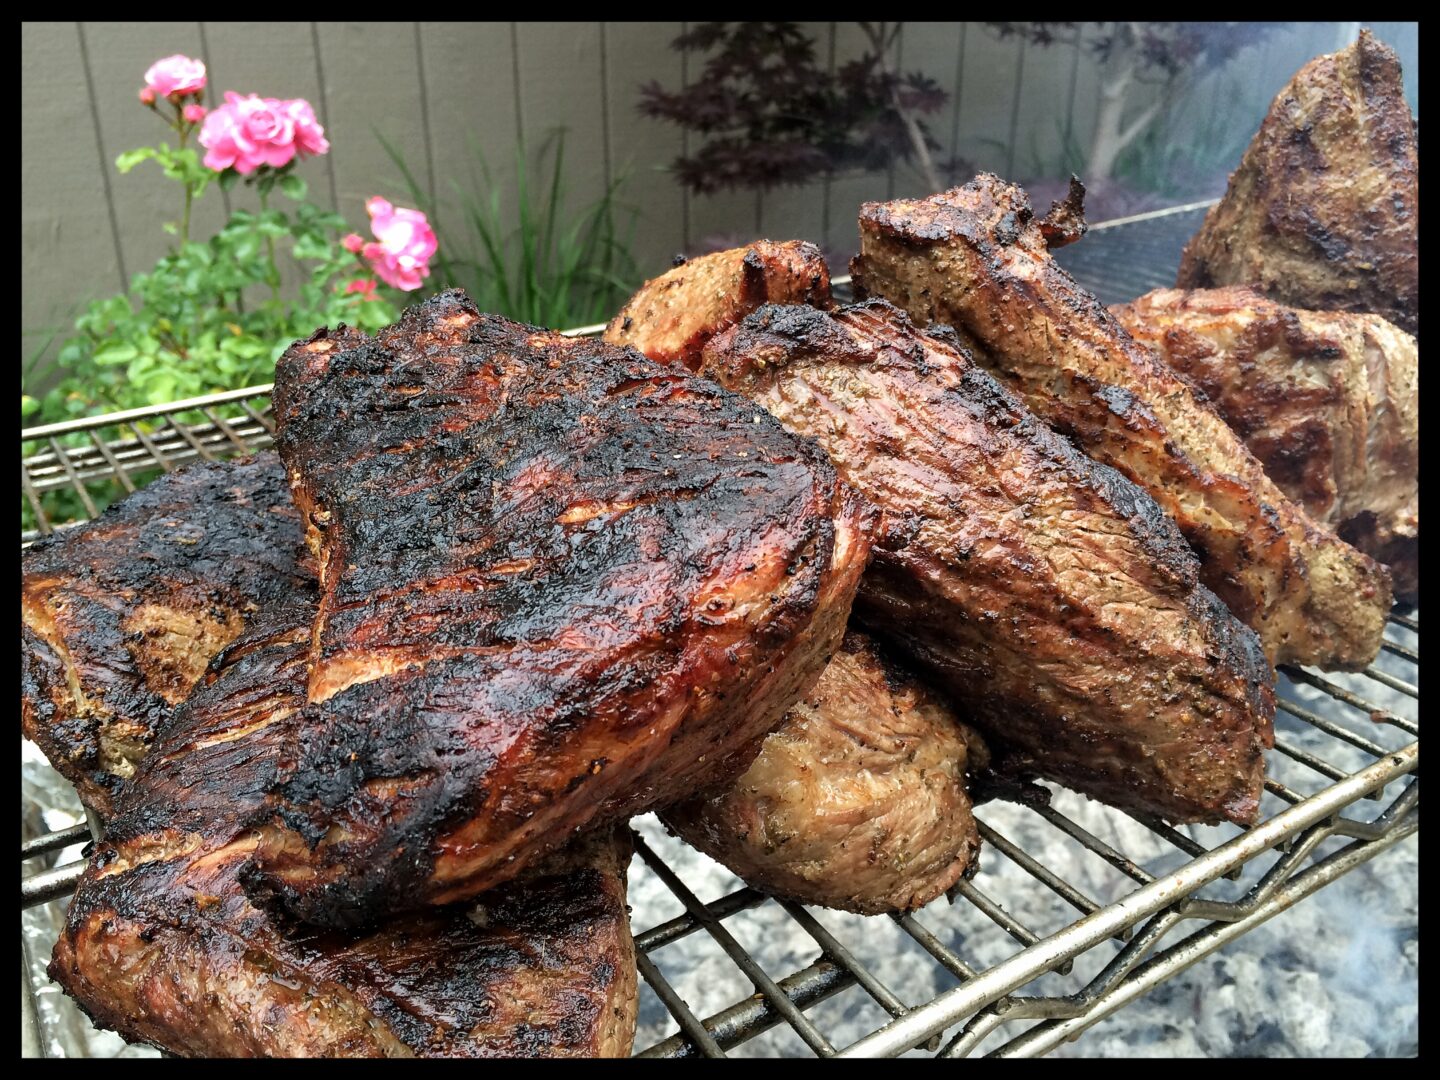 Forty Pounds of Tri Tip Rest over the Warm Mesquite Coals